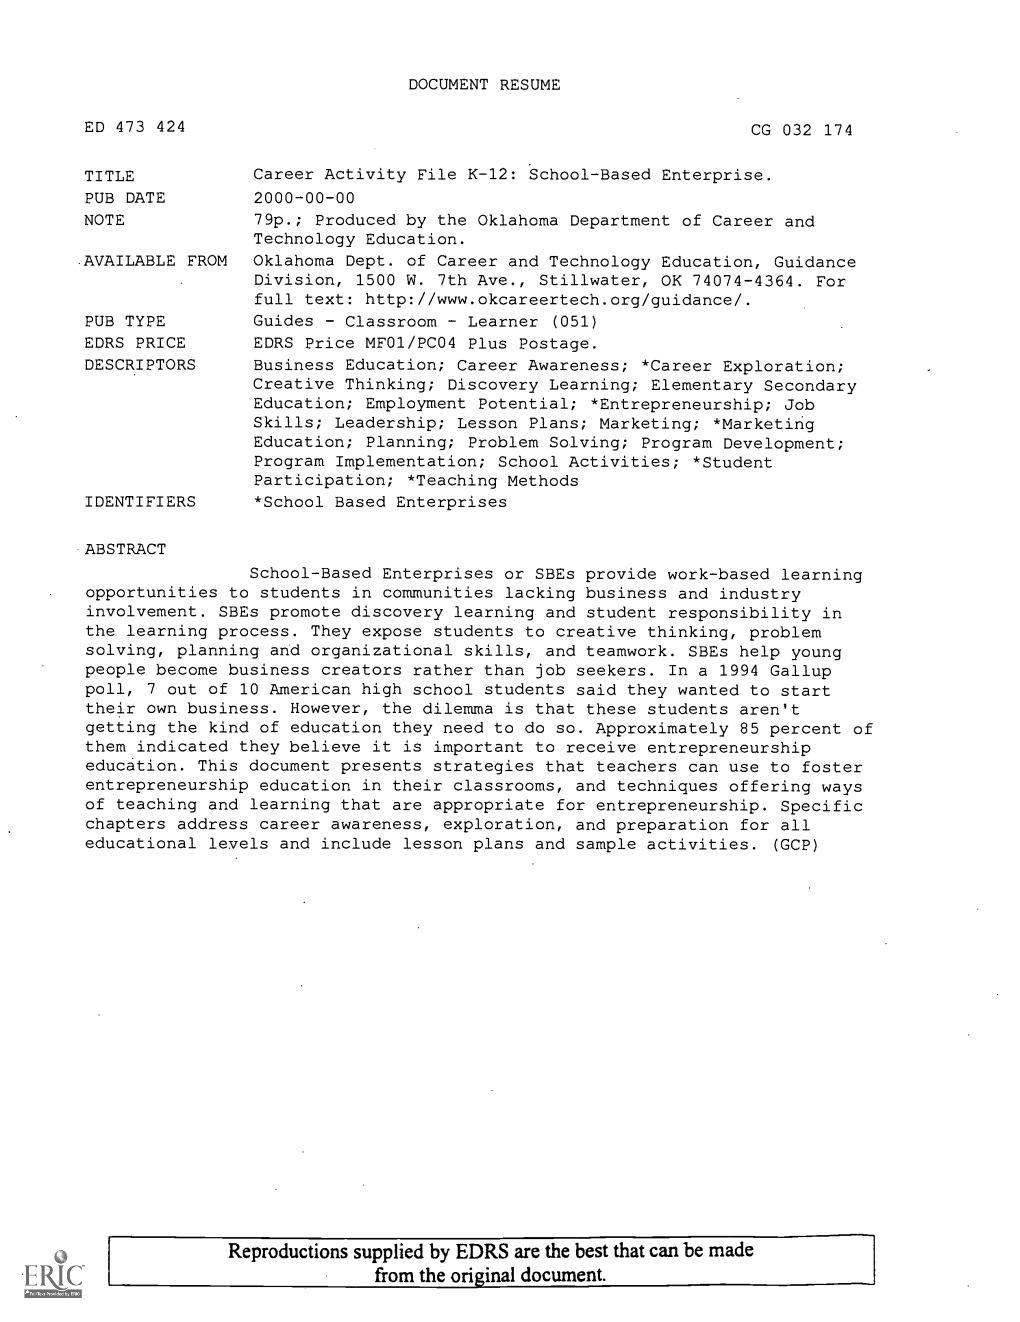 TITLE Career Activity File K-12: School-Based Enterprise. PUB DATE 2000-00-00 NOTE 79P.; Produced by the Oklahoma Department of Career and Technology Education